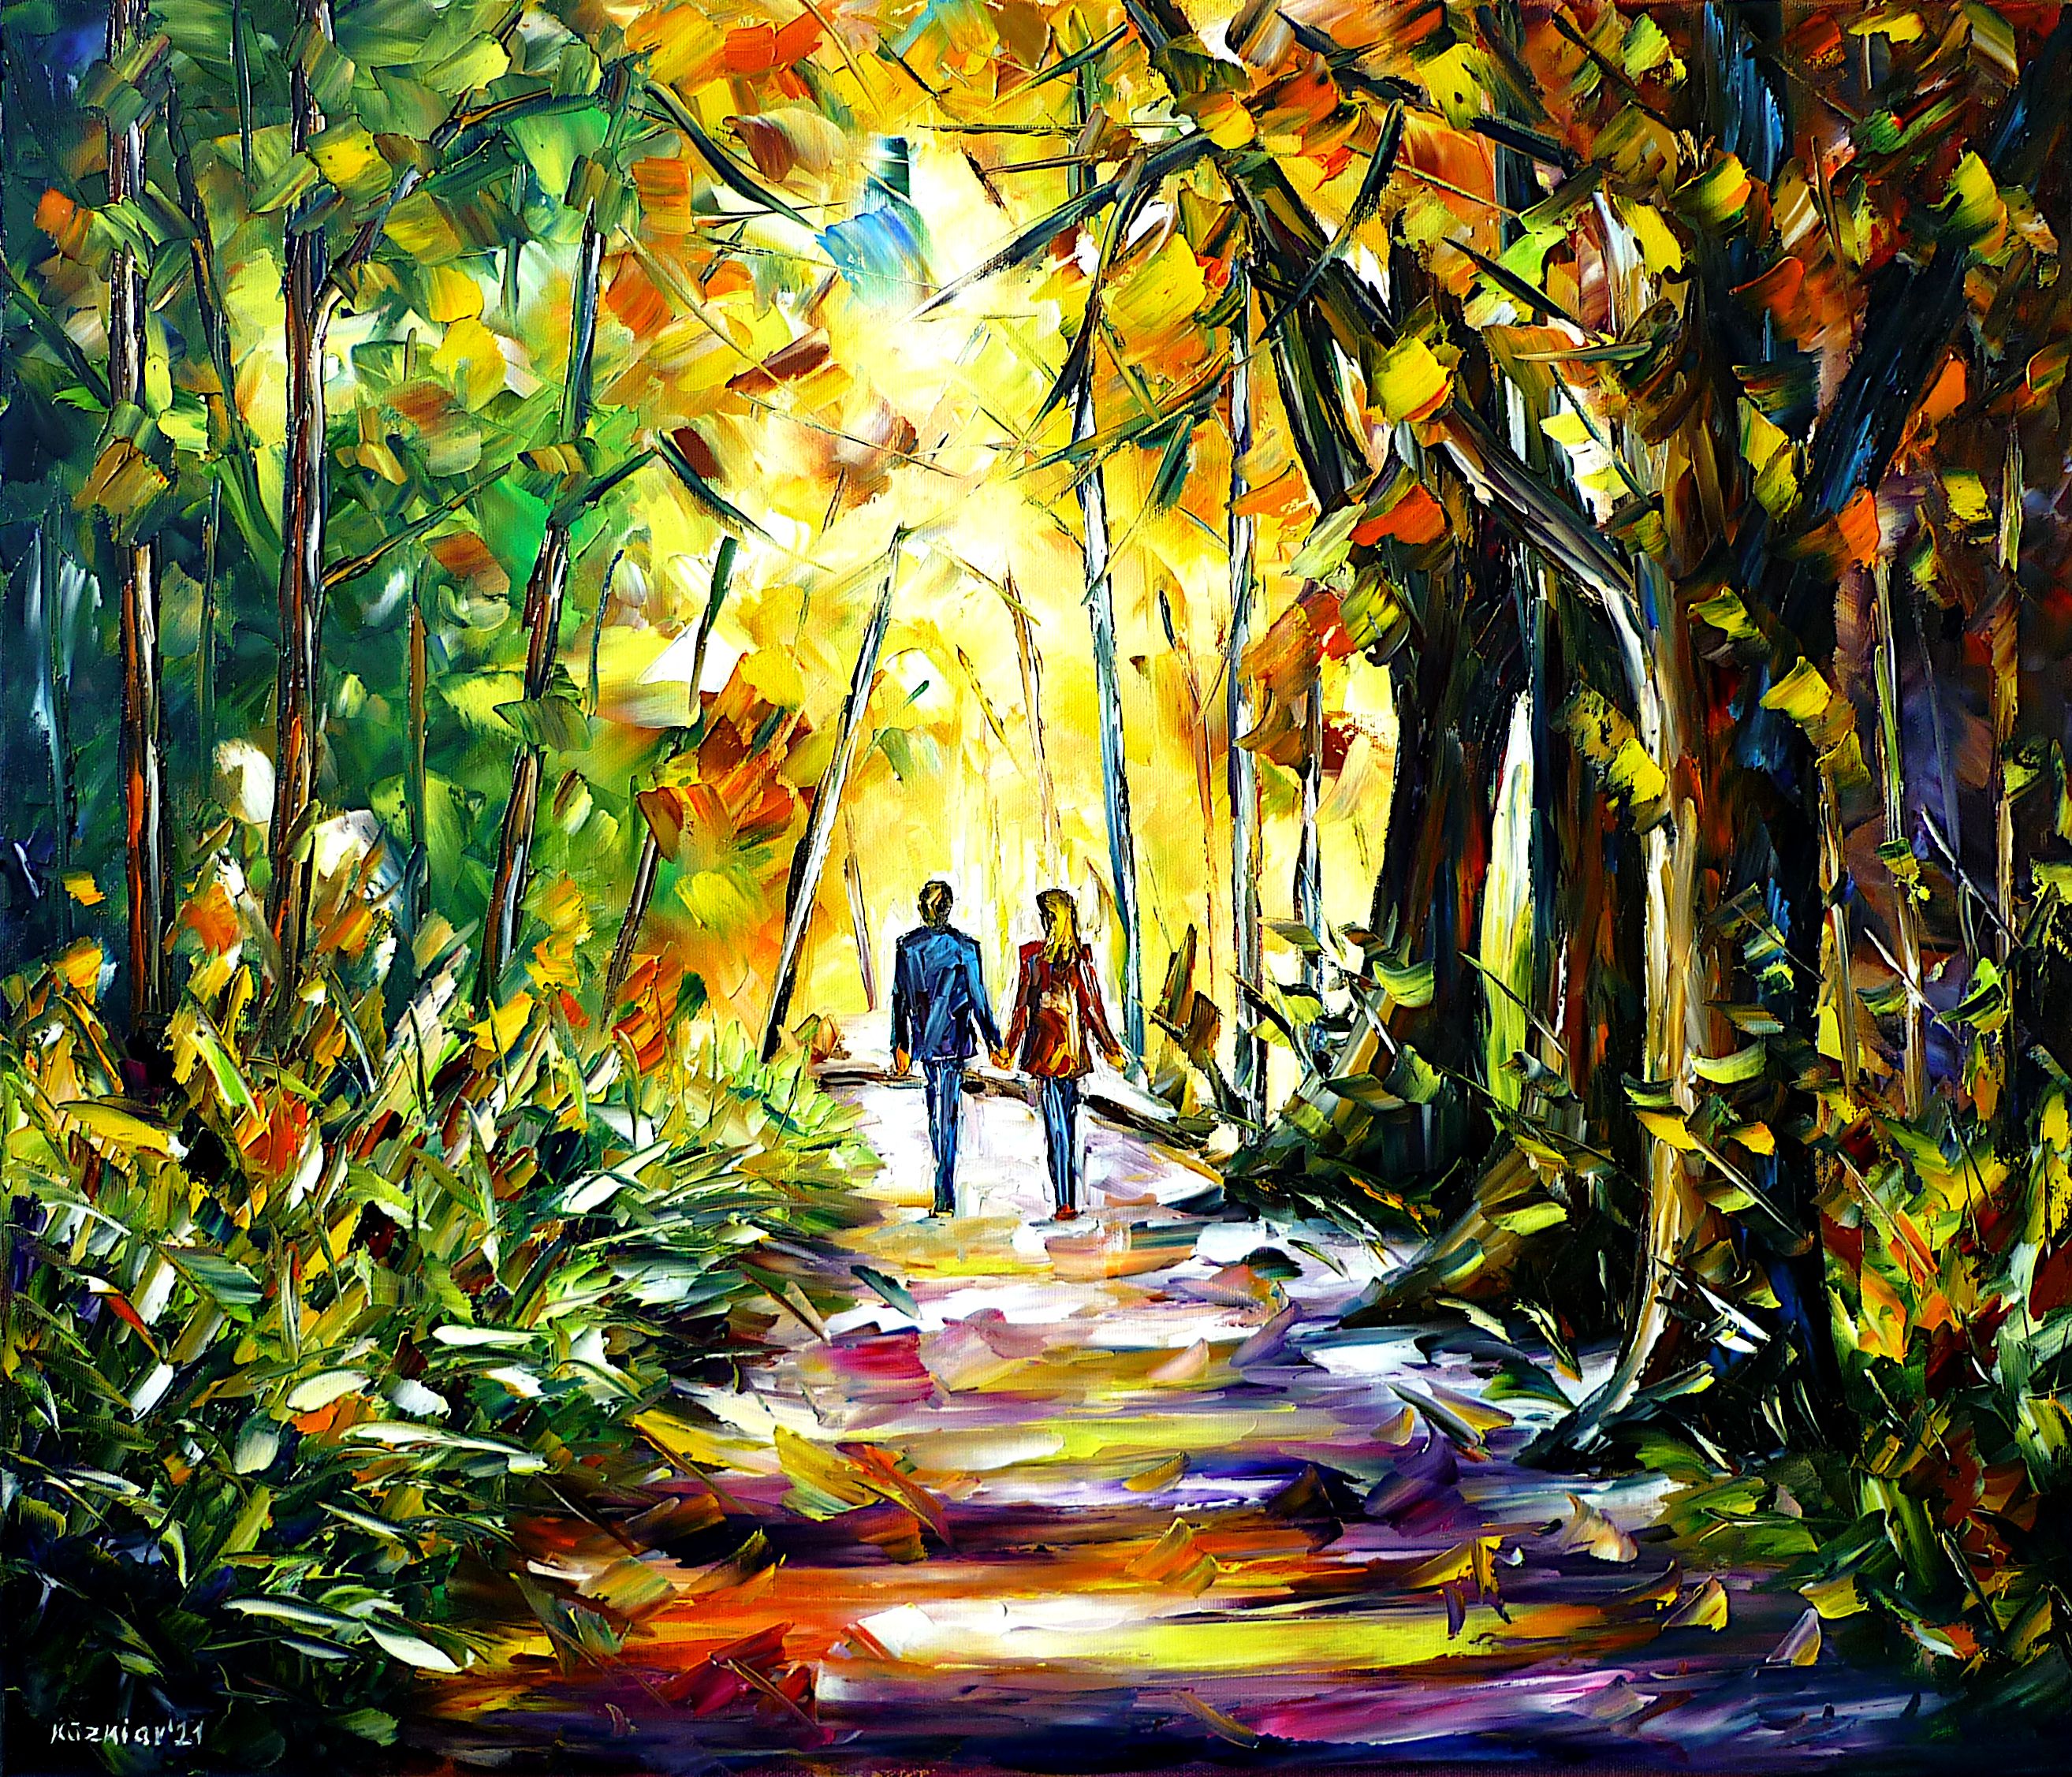 late summer,autumn begin,summer and autumn,love and romance,romantic scene,romantic painting,park in autumn,park walk,a walk in the park,autumn walk,love couple in autumn,love painting,i love you,hand in hand,holding hands,man loves woman,lovers in the park,people in autumn,people in the park,park landscape,golden autumn,golden fall,yellow autumn,beautiful autumn,fall lovers,autumn lovers,autumn abstract,landscape abstract,friendly painting,peaceful painting,autumn trees,autumn colors,autumn mood,autumn love,autumn painting,colorful autumn,palette knife oil painting,modern art,impressionism,abstract painting,lively colors,bright colors,light reflections,impasto painting,living room art,living room picture,living room painting